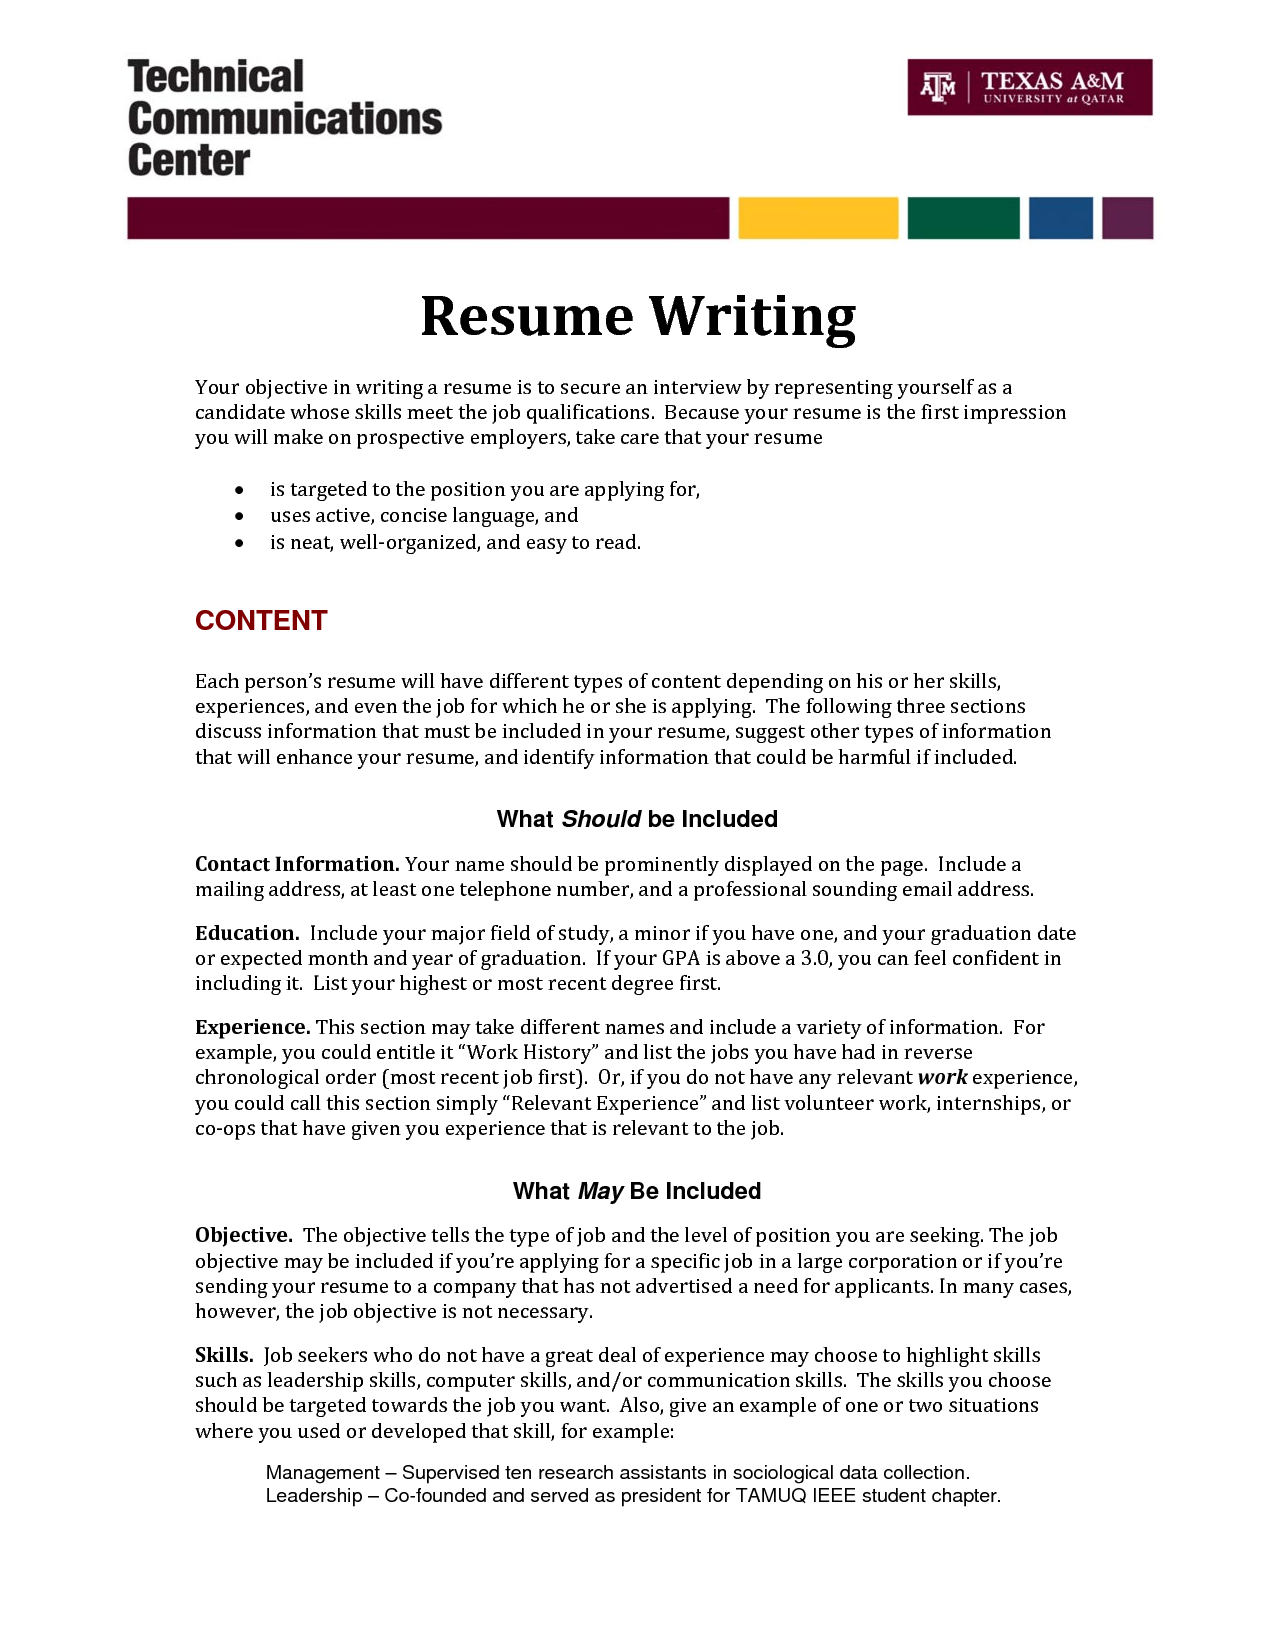 how to write a resume rich image and wallpaper